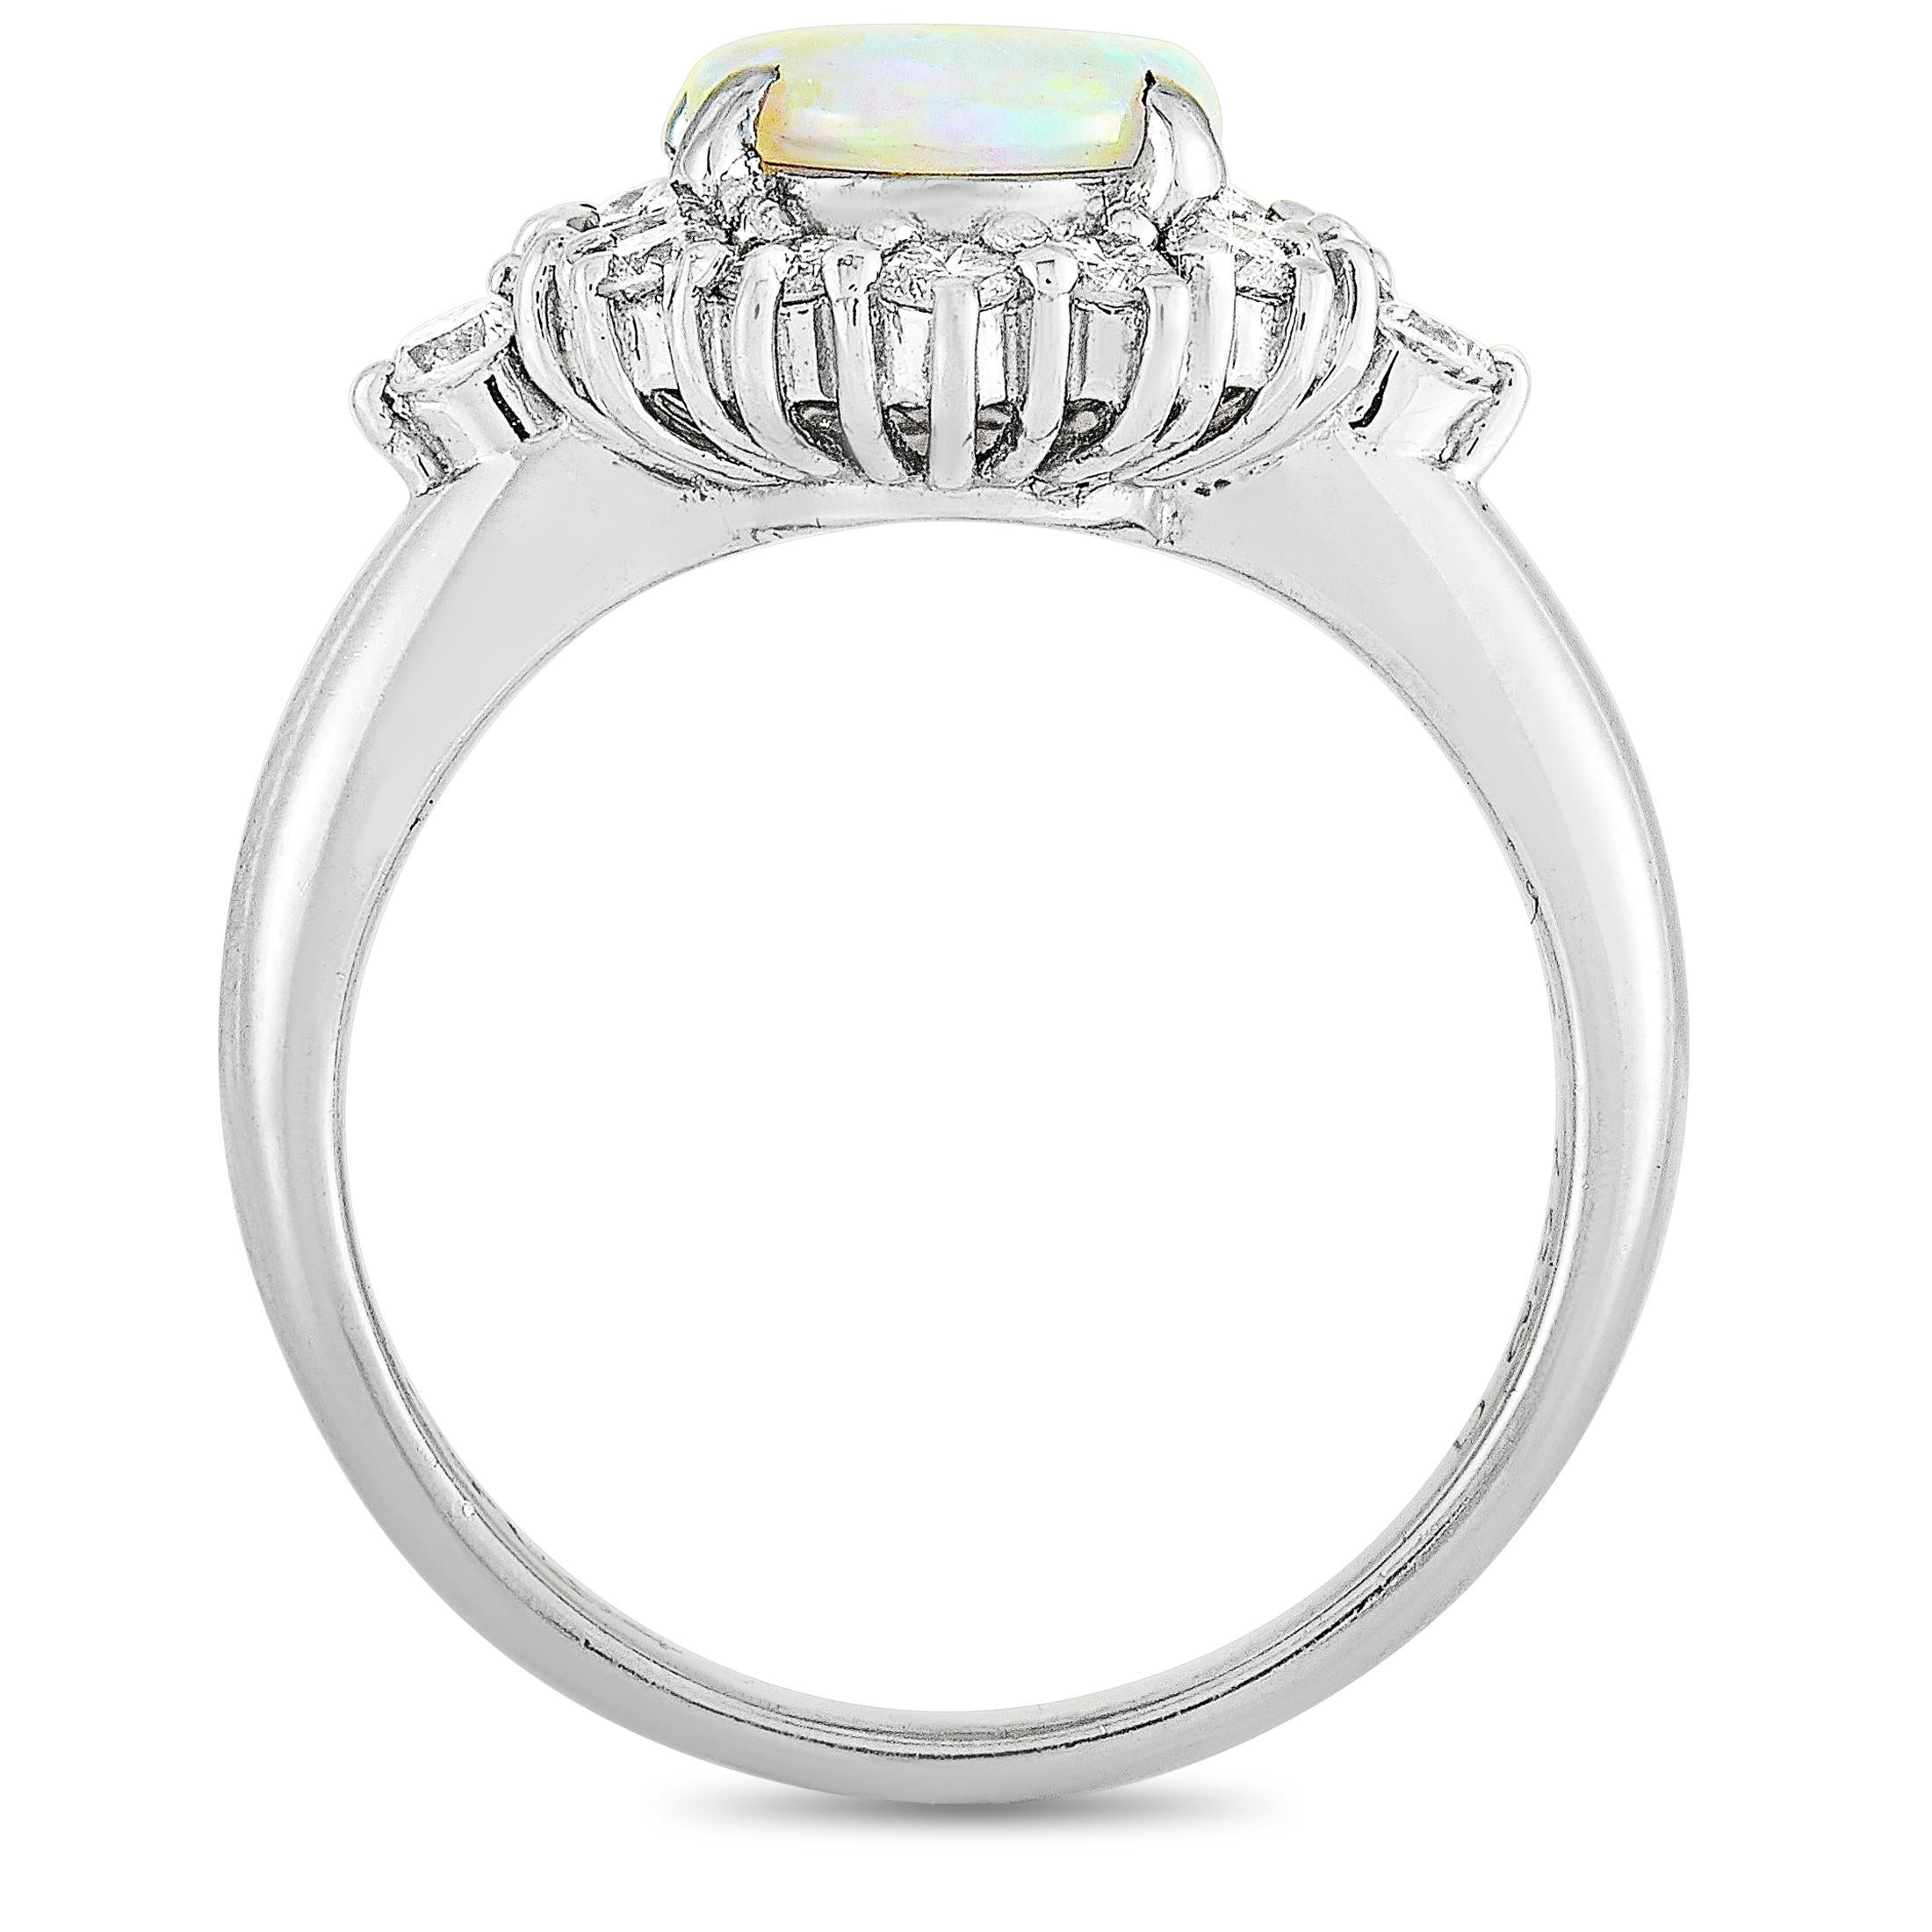 This LB Exclusive ring is crafted from platinum and weighs 5.8 grams. It boasts band thickness of 2 mm and top height of 6 mm, while top dimensions measure 15 by 12 mm. The ring is set with an opal that weighs 0.94 carats and with diamonds that